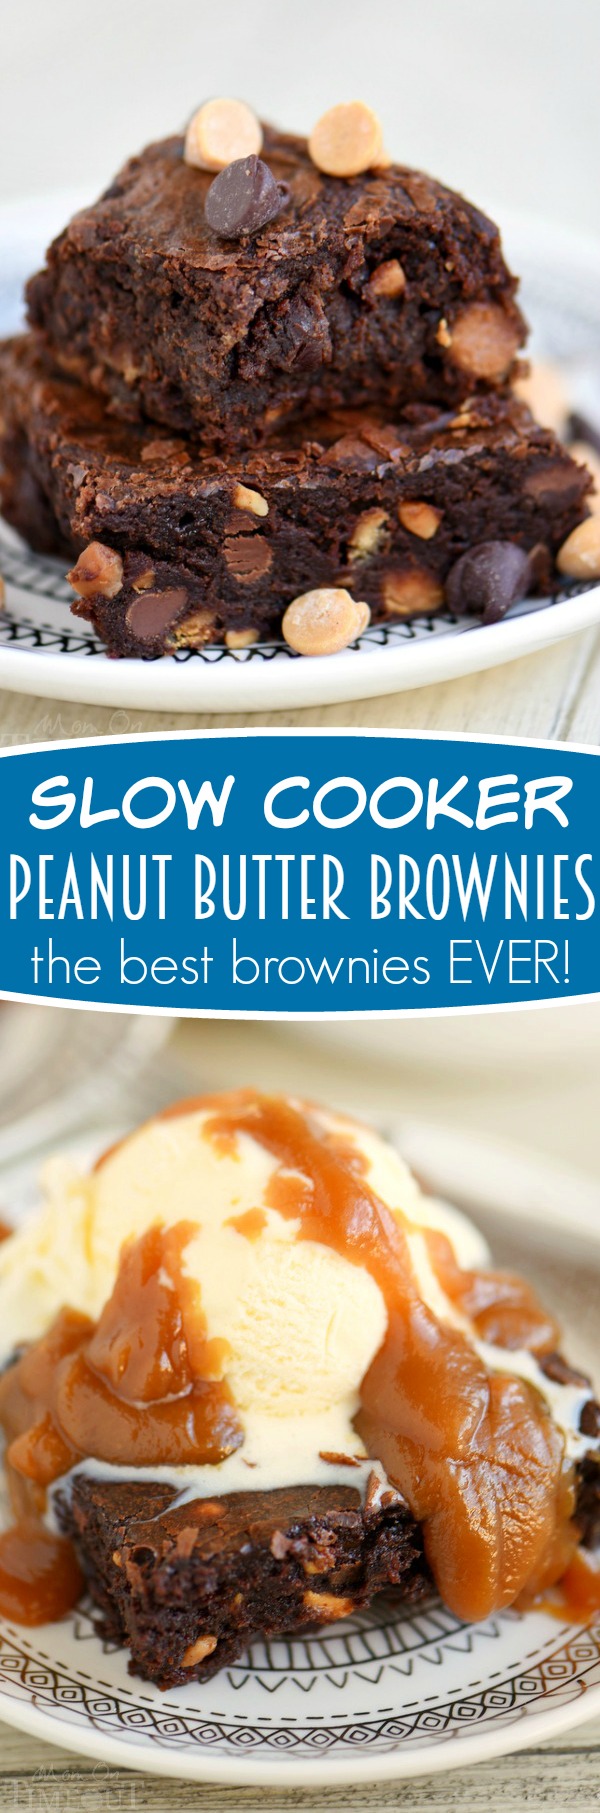 Once you make these Slow Cooker Peanut Butter Brownies - you'll never make brownies in the oven again! Seriously, the best brownies EVER and the recipe is SO easy!